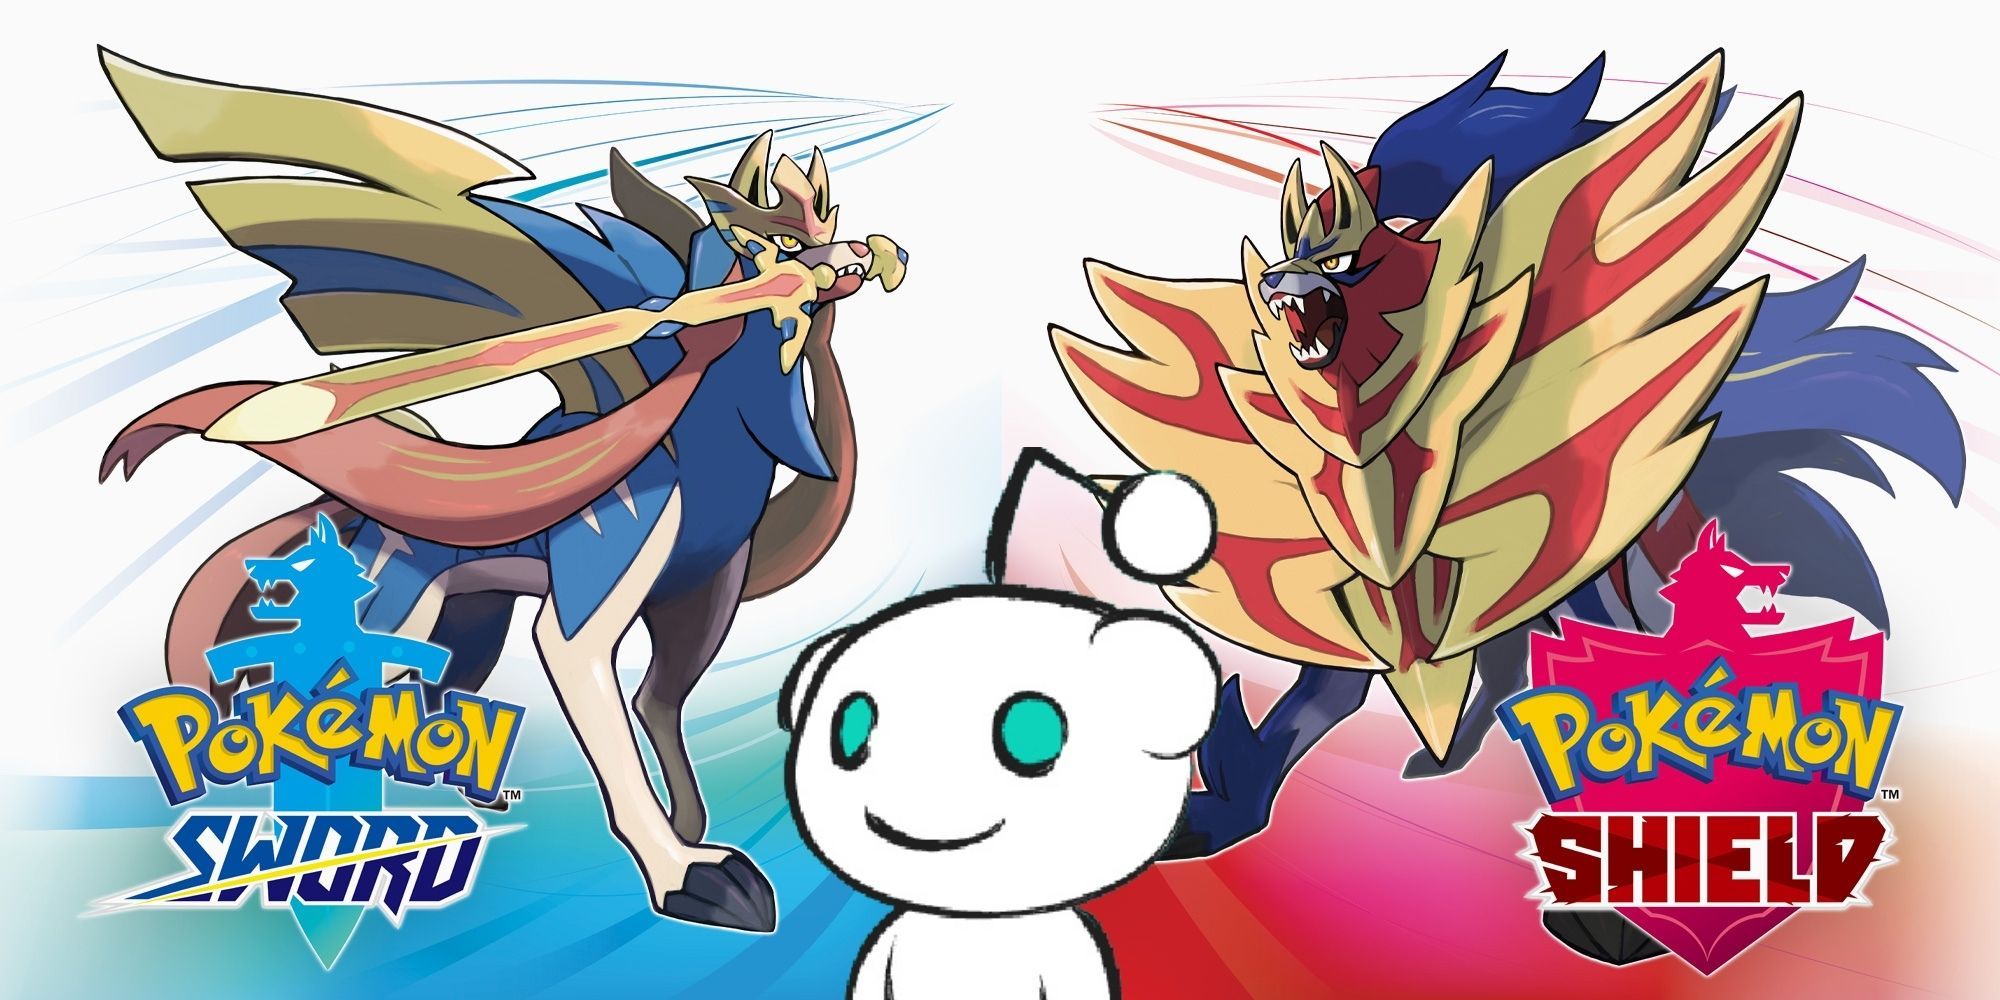 Split image showing the covers for Pokémon Sword and Pokémon Shield and Snoo from Reddit.